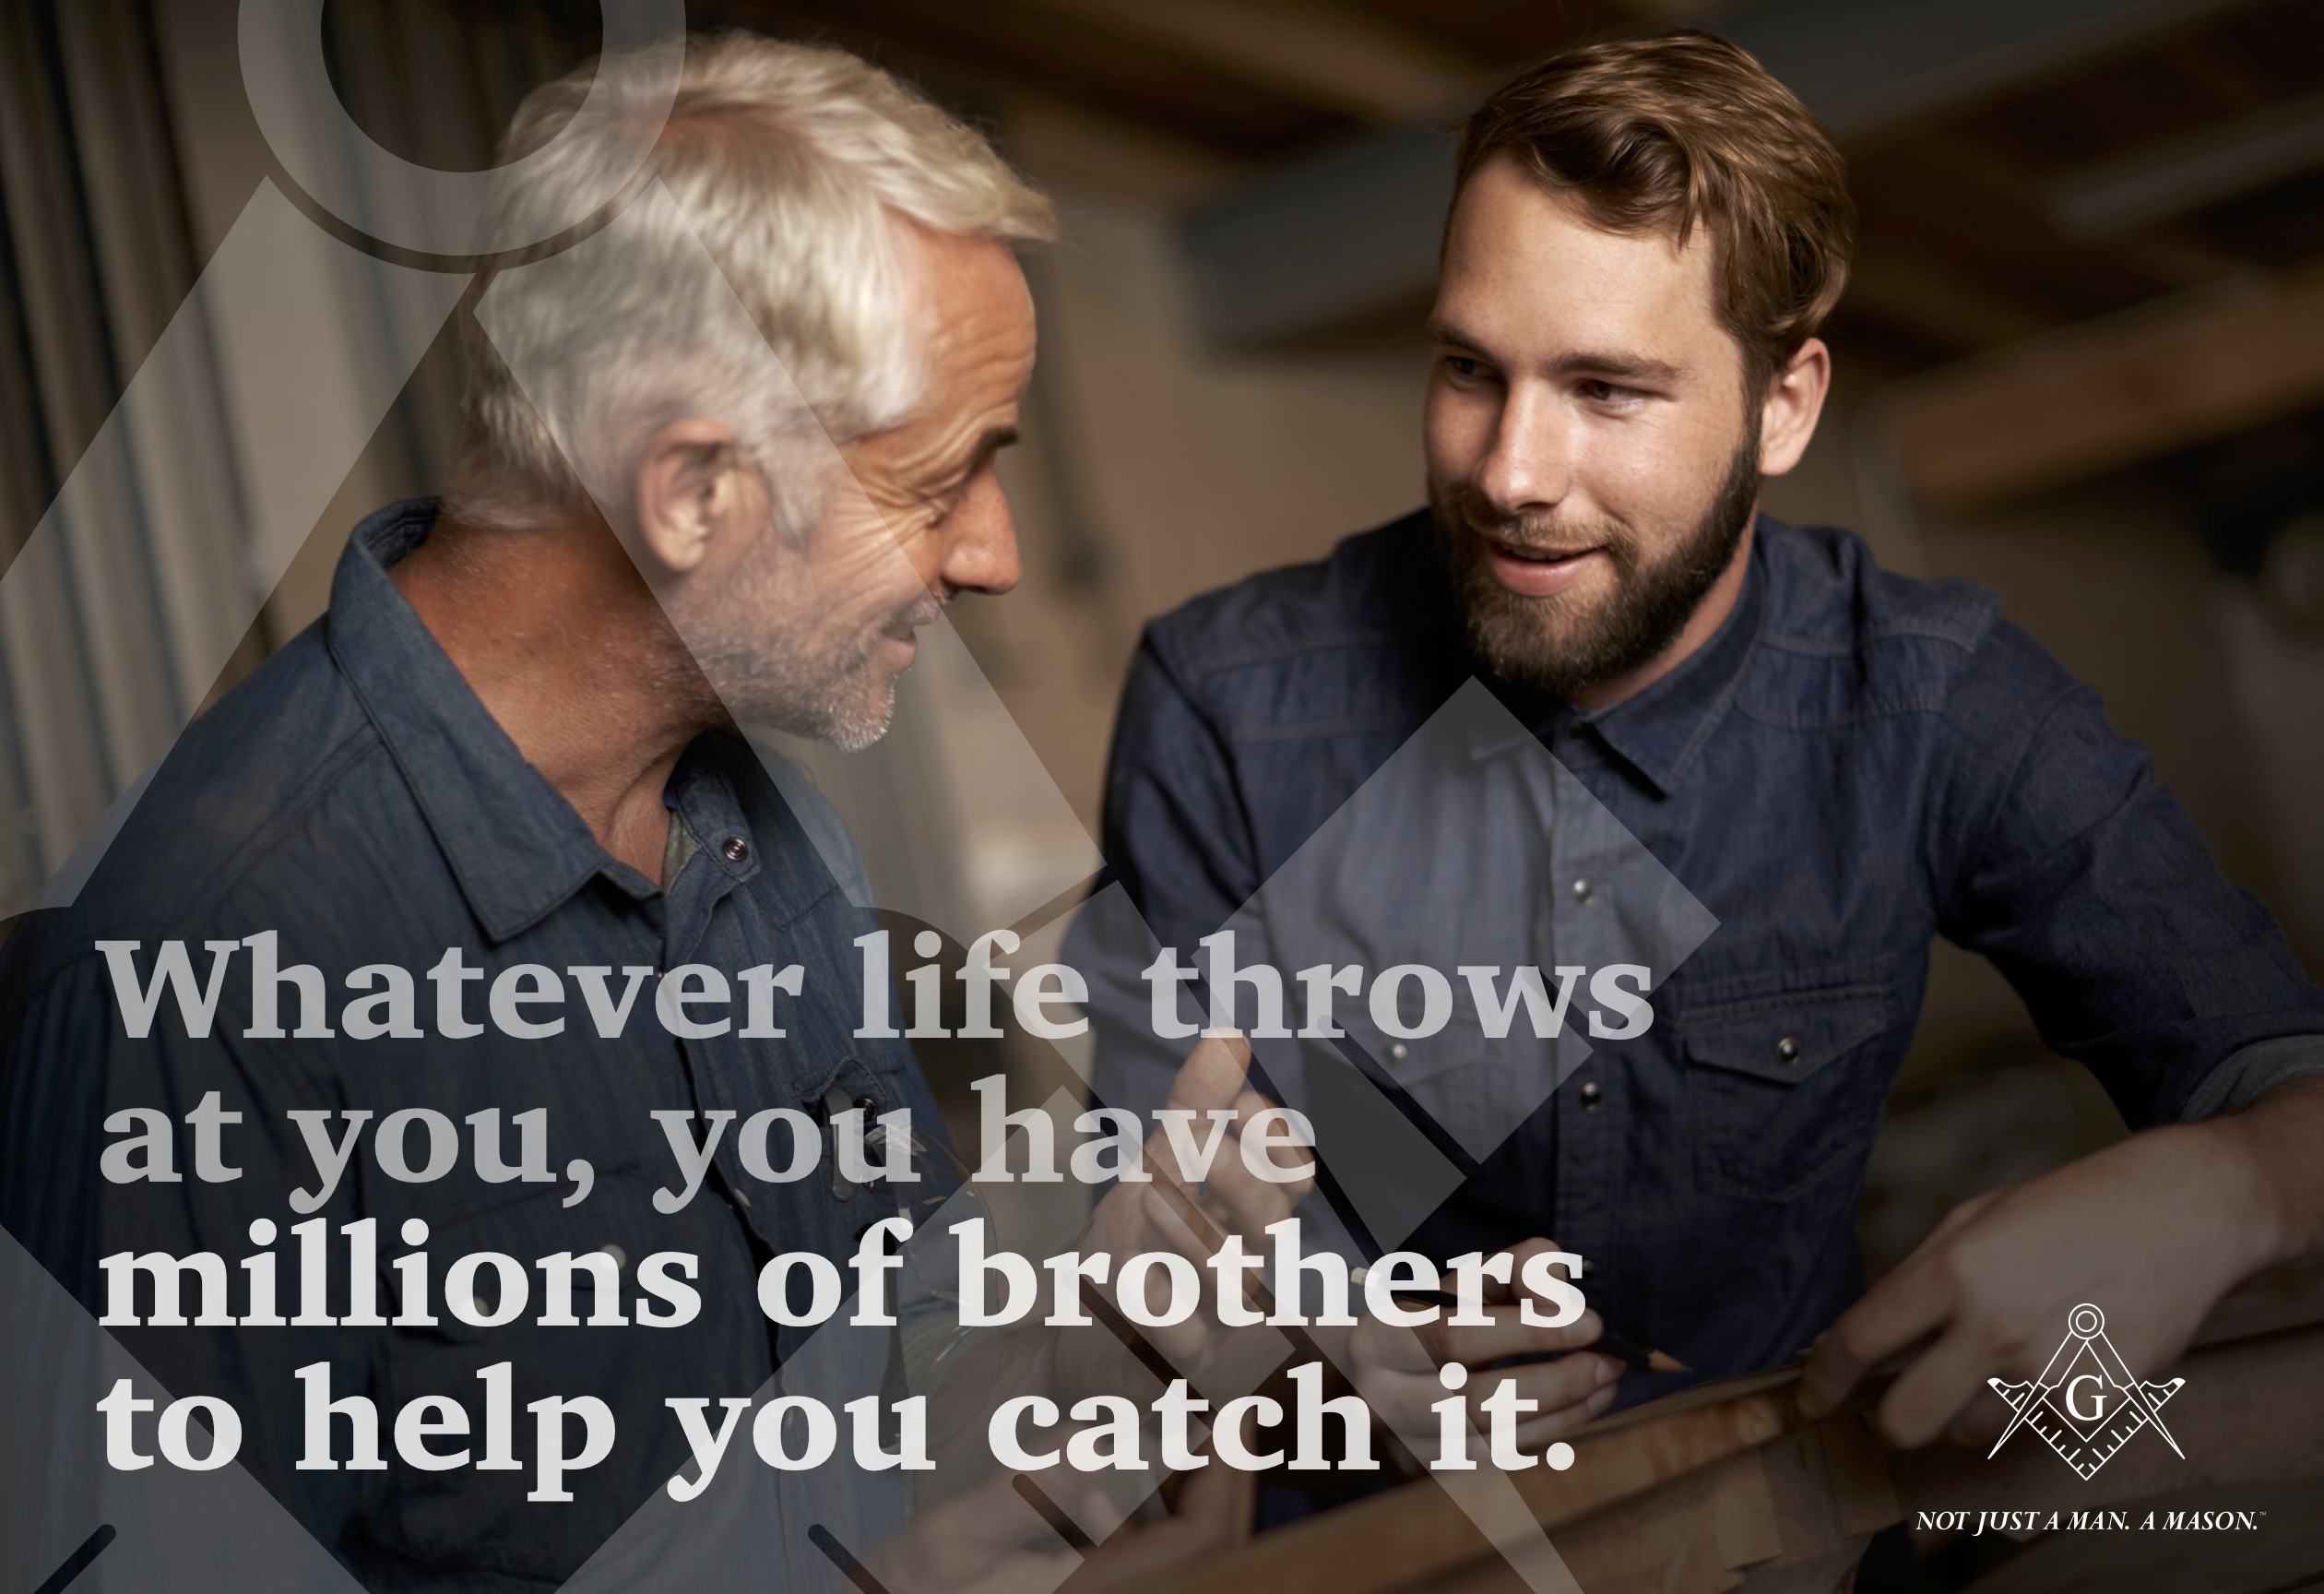 Whatever lift throws at you, you have millions of brothers to help you catch it. Not just a man. A Mason.